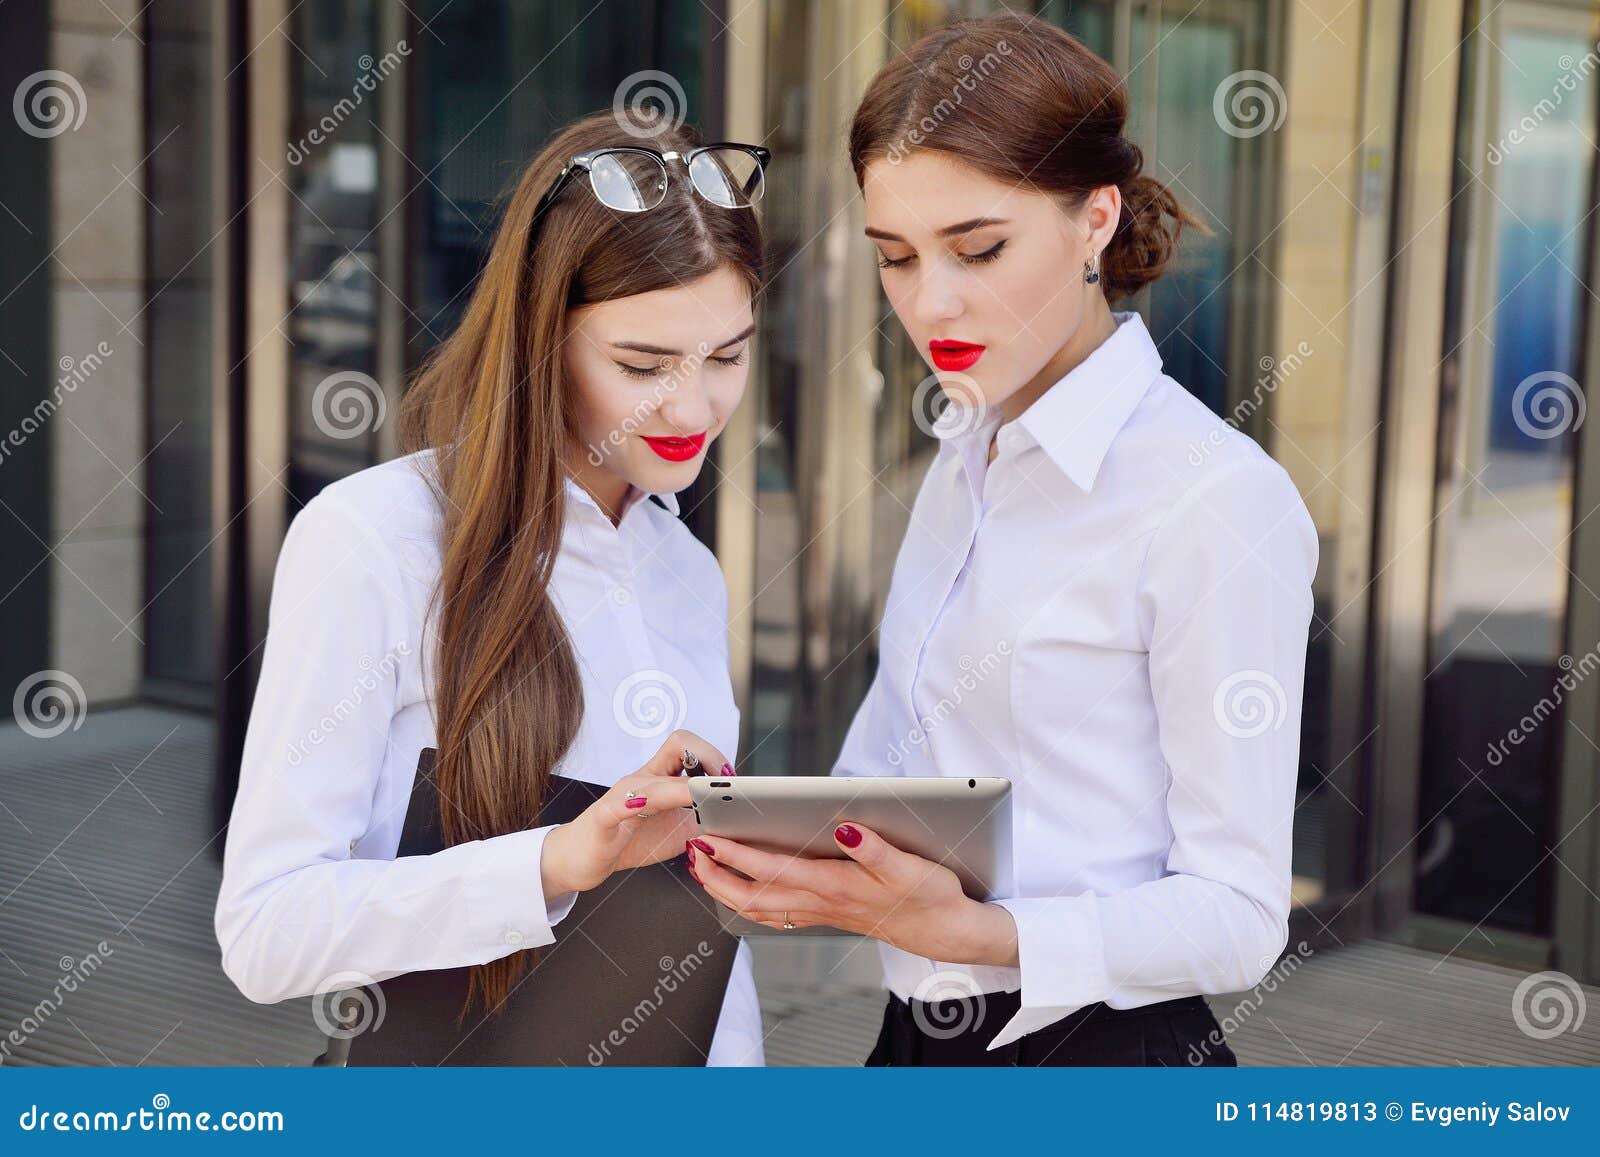 business lady. office staff. two young girls with electronic tab